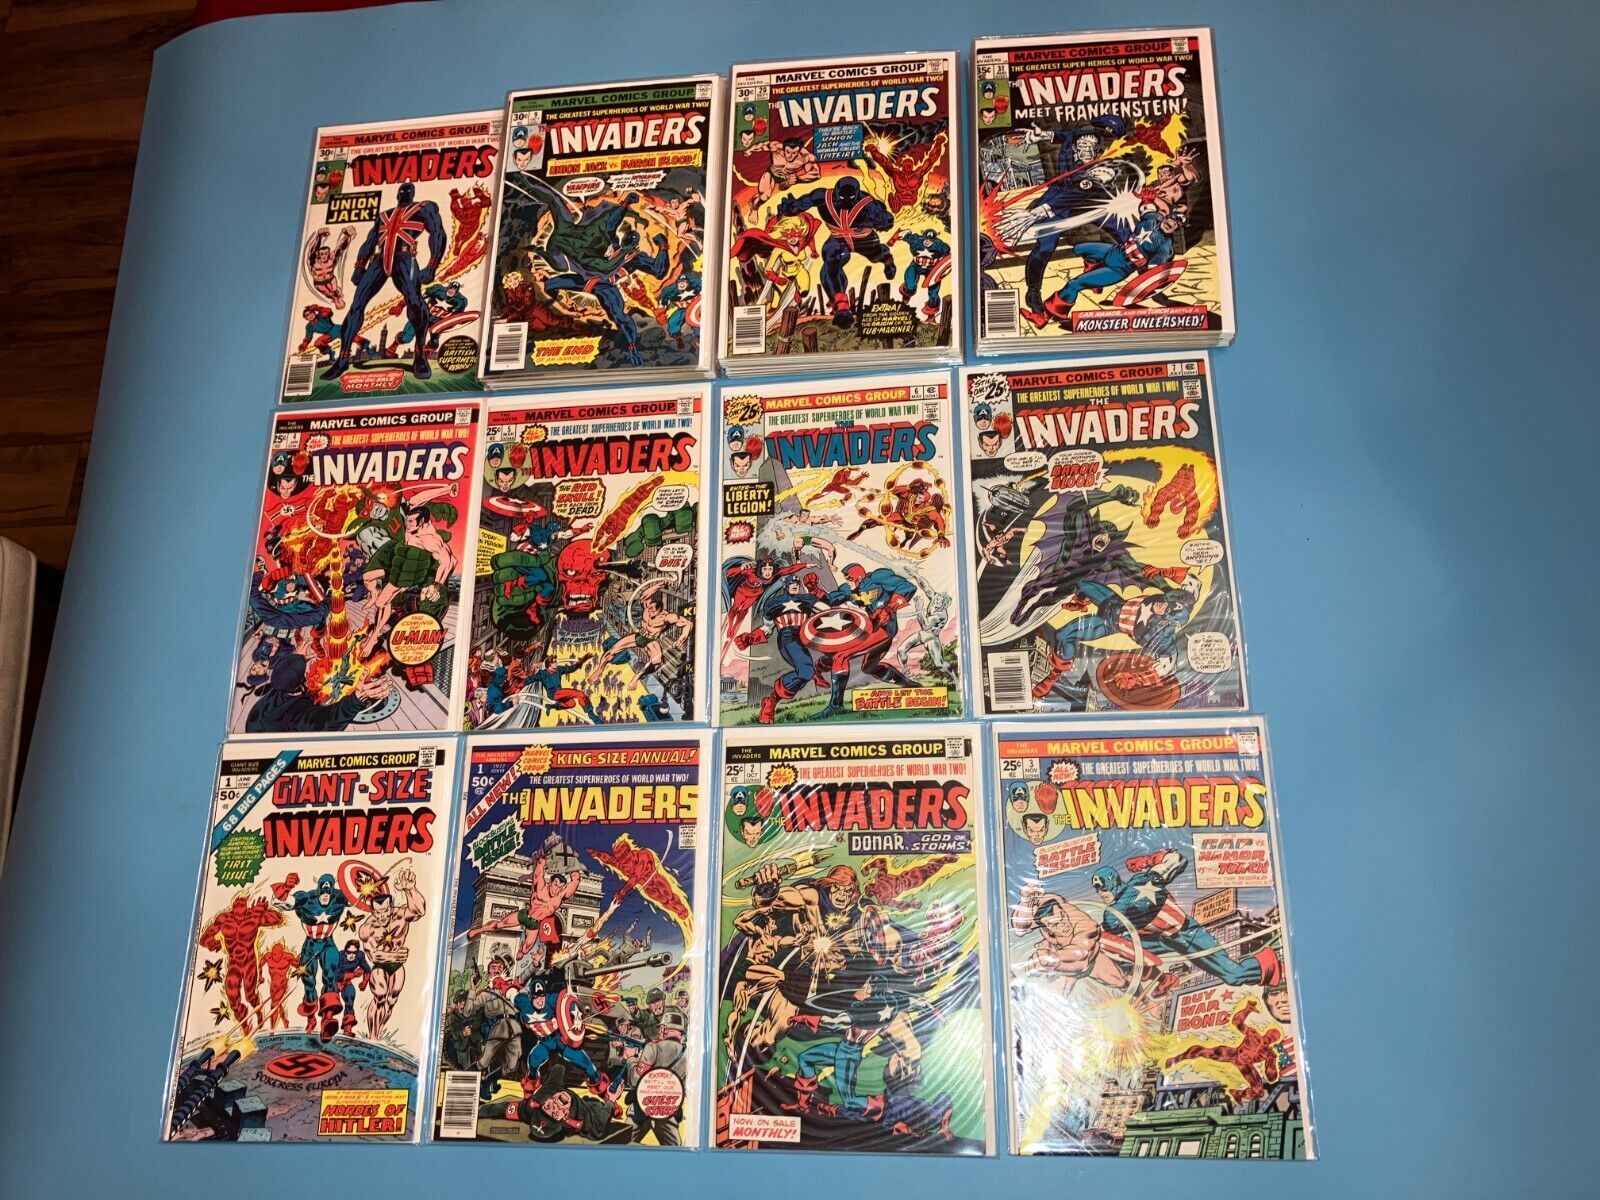 INVADERS #2-41 PLUS GIANT SIZE #1 and ANNUAL #1 SET 1975 HIGH GRADE